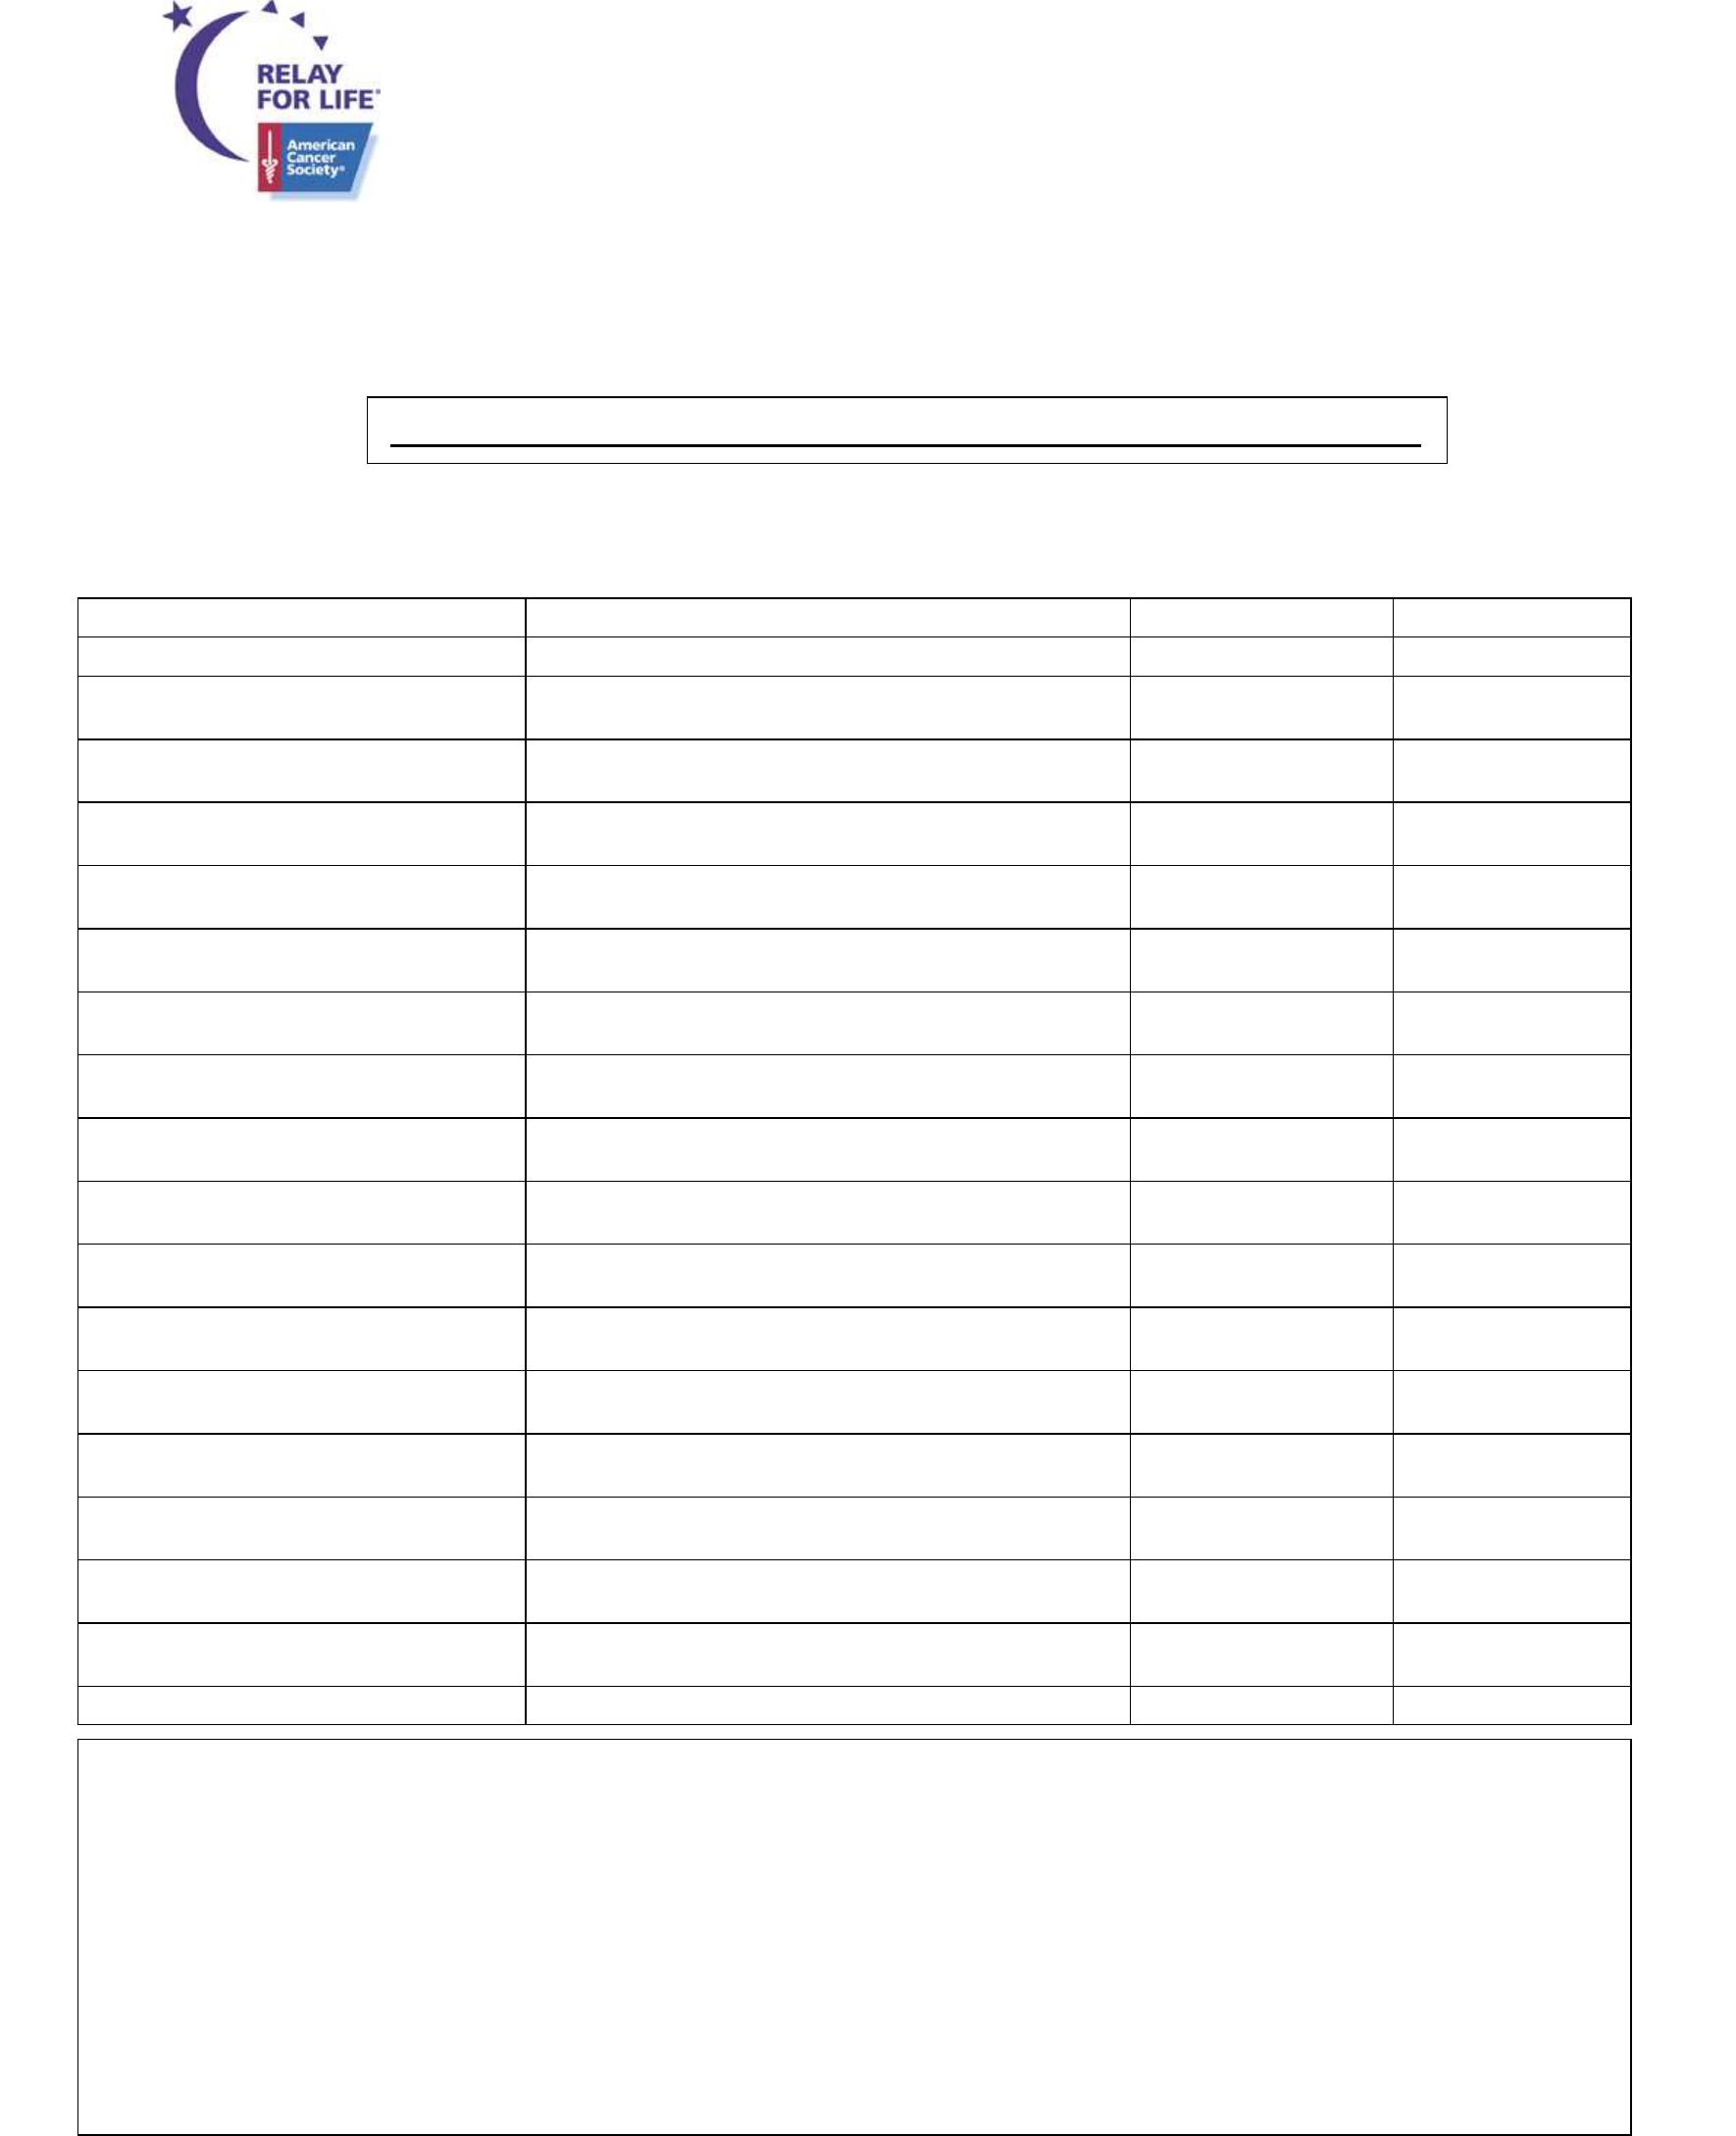 Relay For Life Donation Form – America Free Download Regarding Blank Sponsor Form Template Free